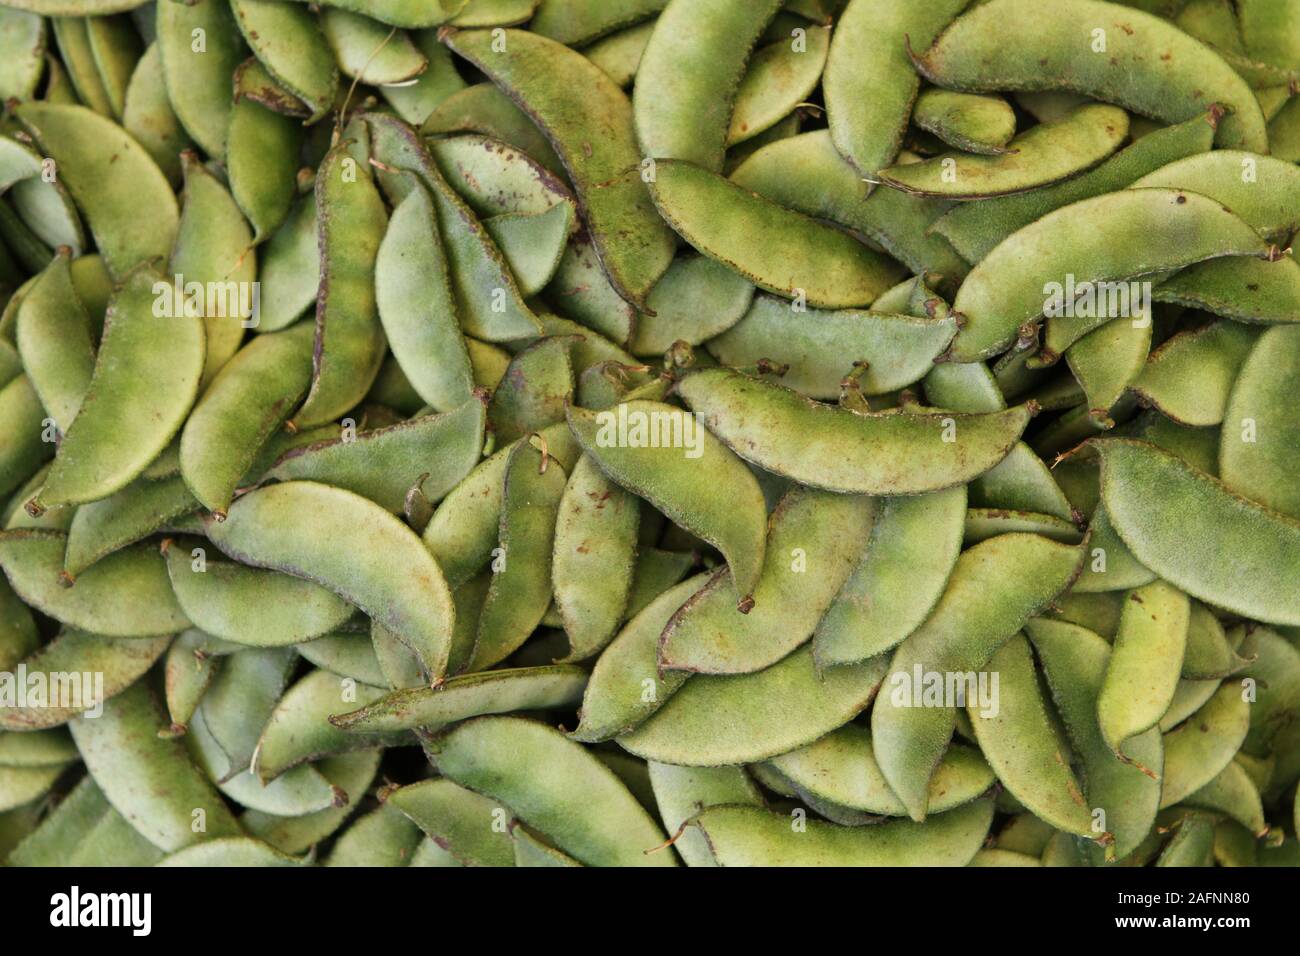 Surati papdi or hyacinth beans - Indian vegetable Stock Photo